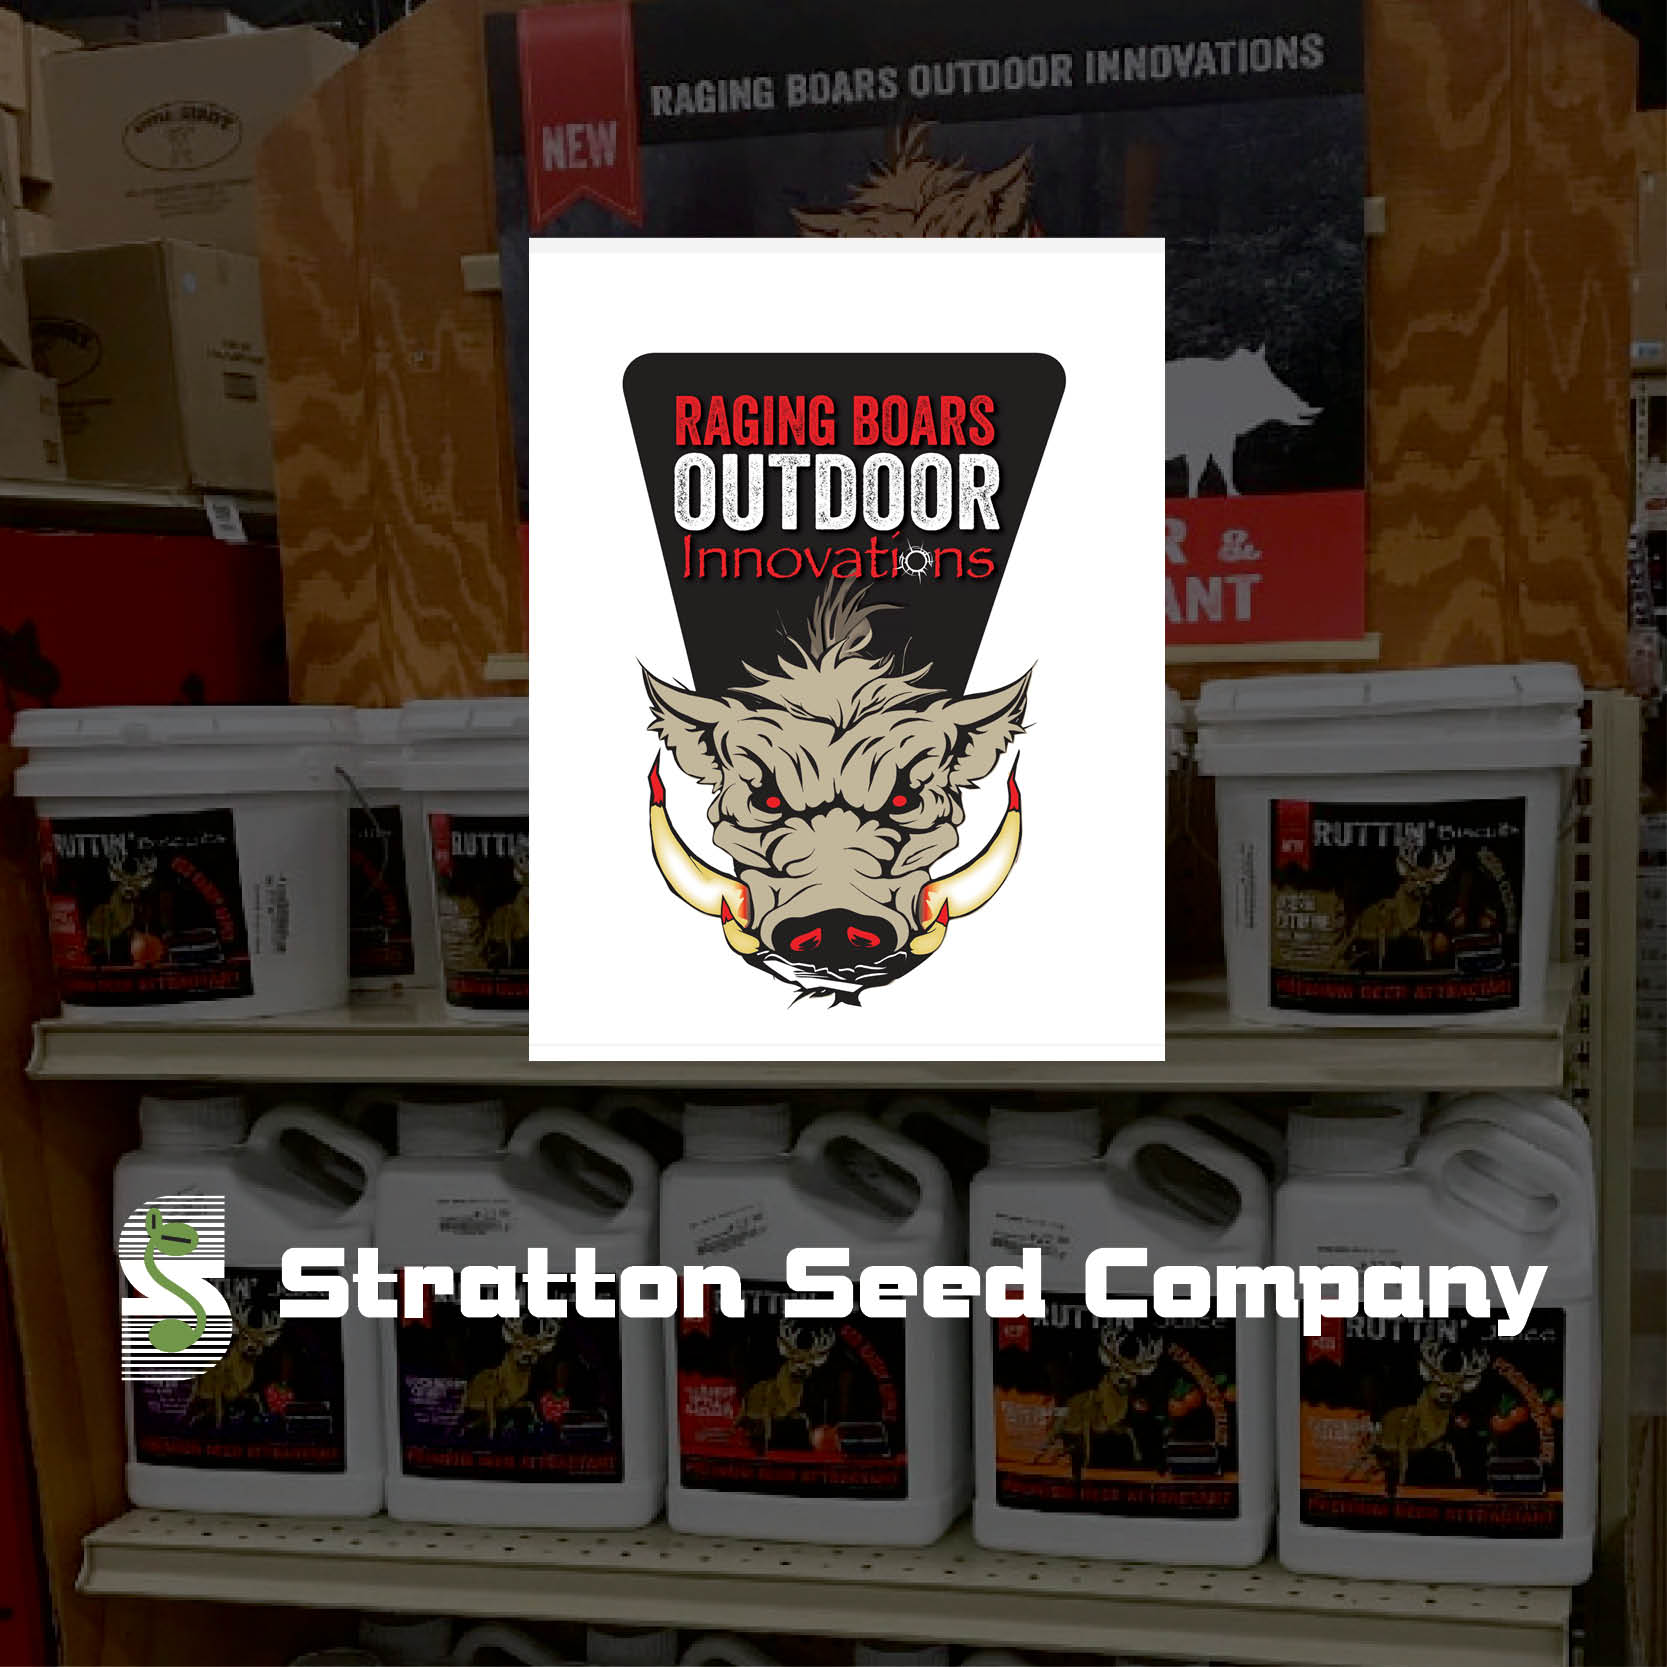 Stratton Seed to be Distributor of Raging Boars Outdoor Innovations in Mid-South